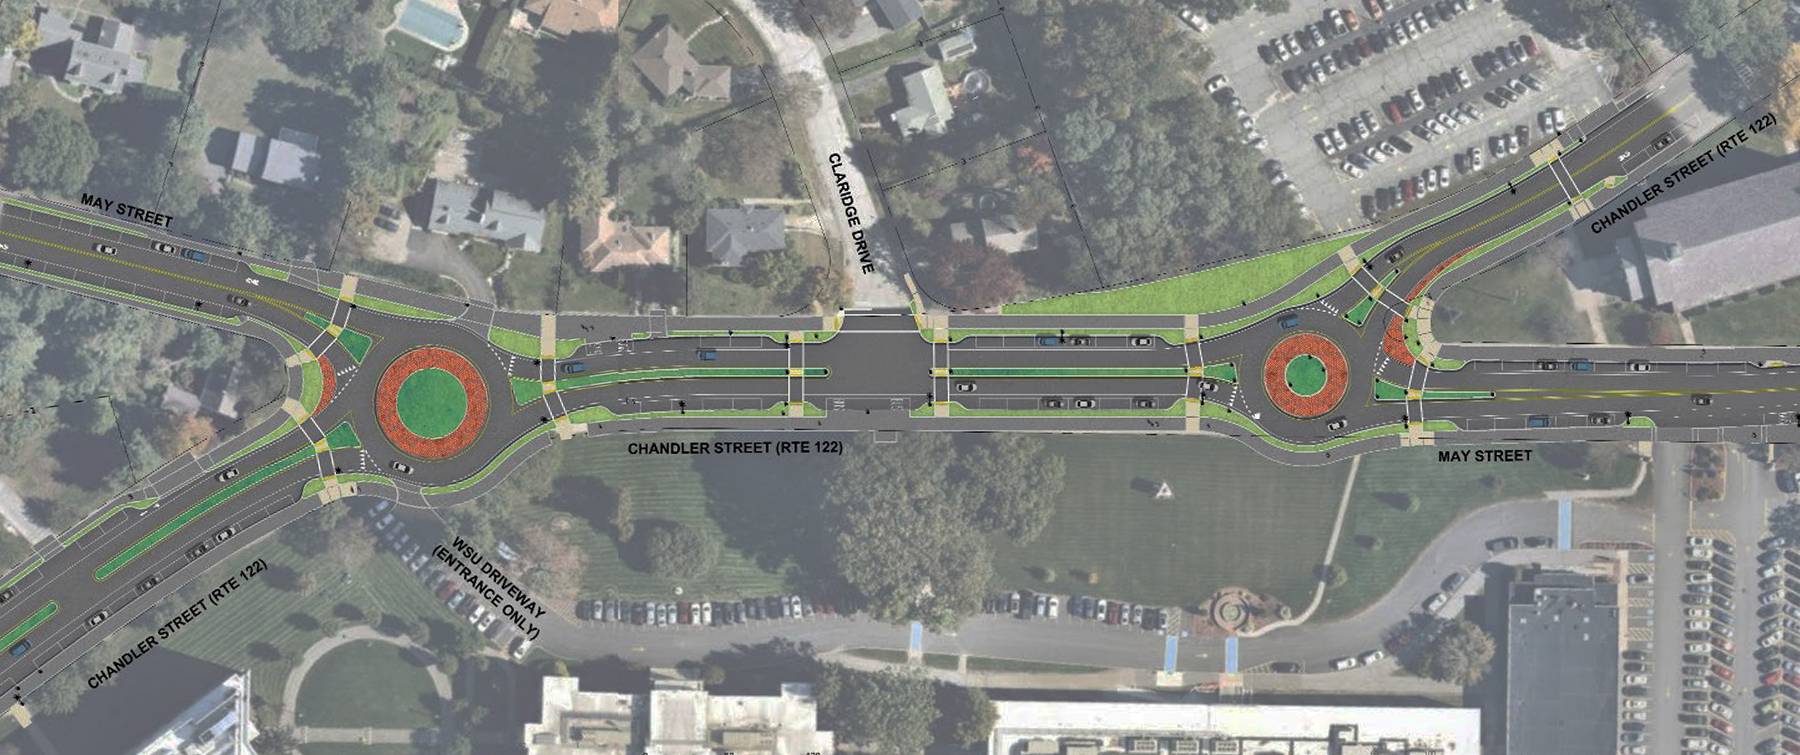 A rendering of two new roundabouts overlaid on an aerial image of the intersections of Chandler Street and May Street in Worcester. Two "Y"-shaped intersections where the two streets converge would be converted into a pair of roundabouts, with two wide shared-use pathways around the edges of and between the new roundabouts.